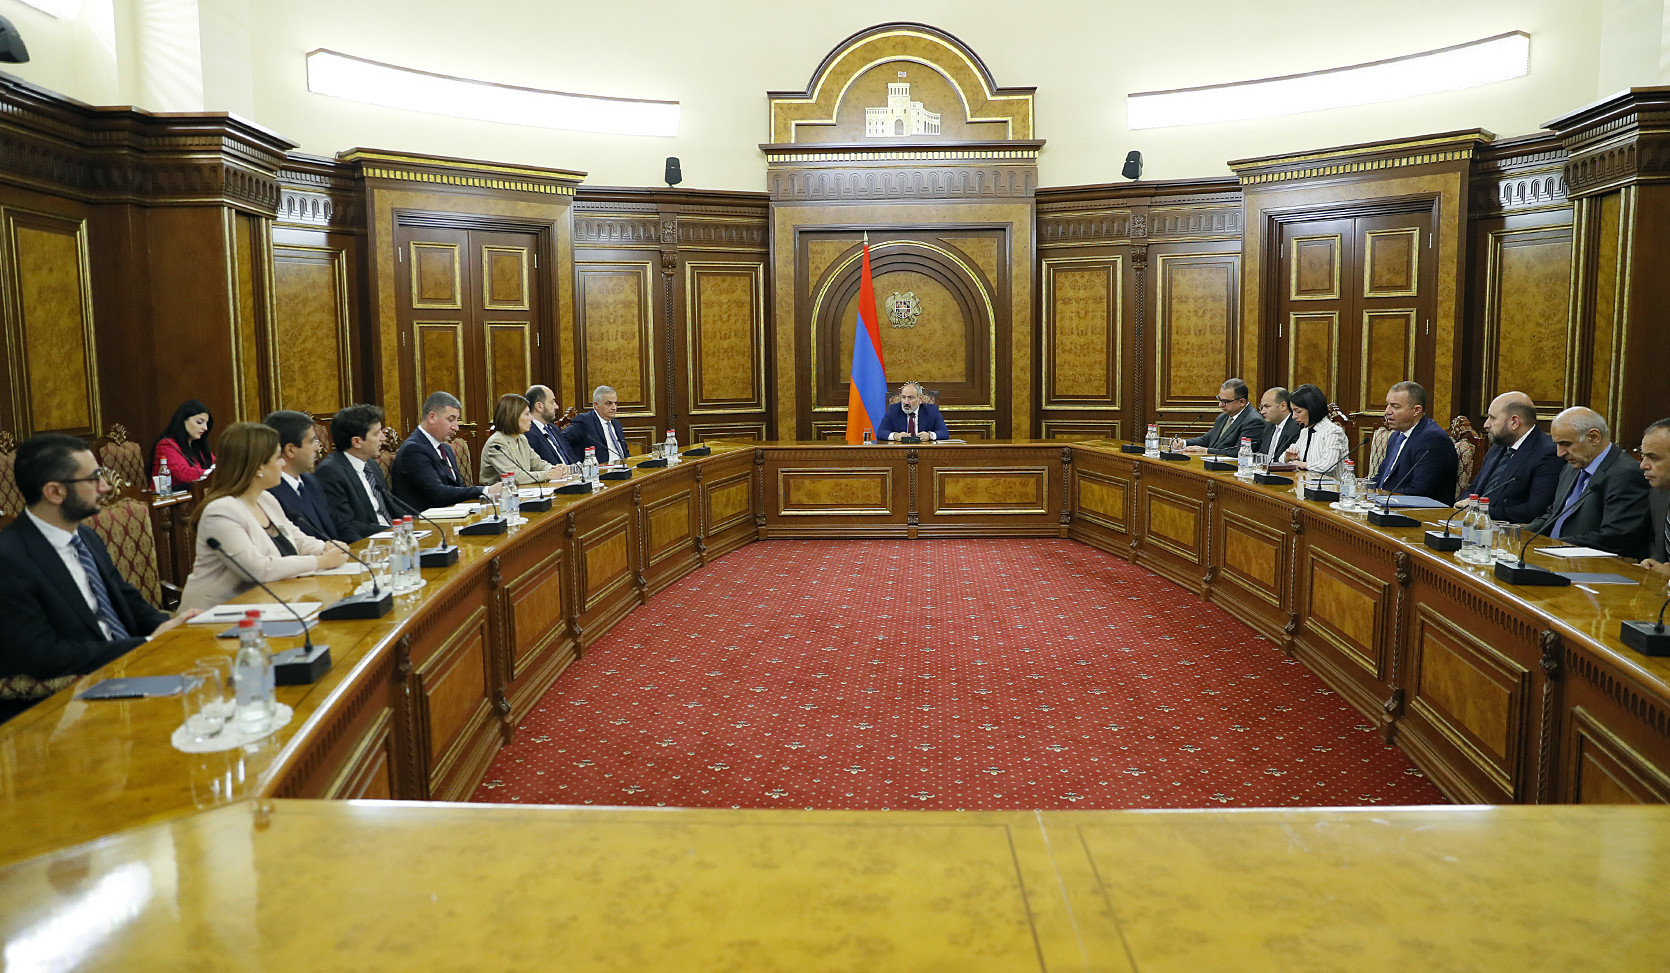 Our compatriots forcibly displaced from Nagorno-Karabakh should open card accounts to receive financial support: Support programs and further steps discussed under leadership of Prime Minister